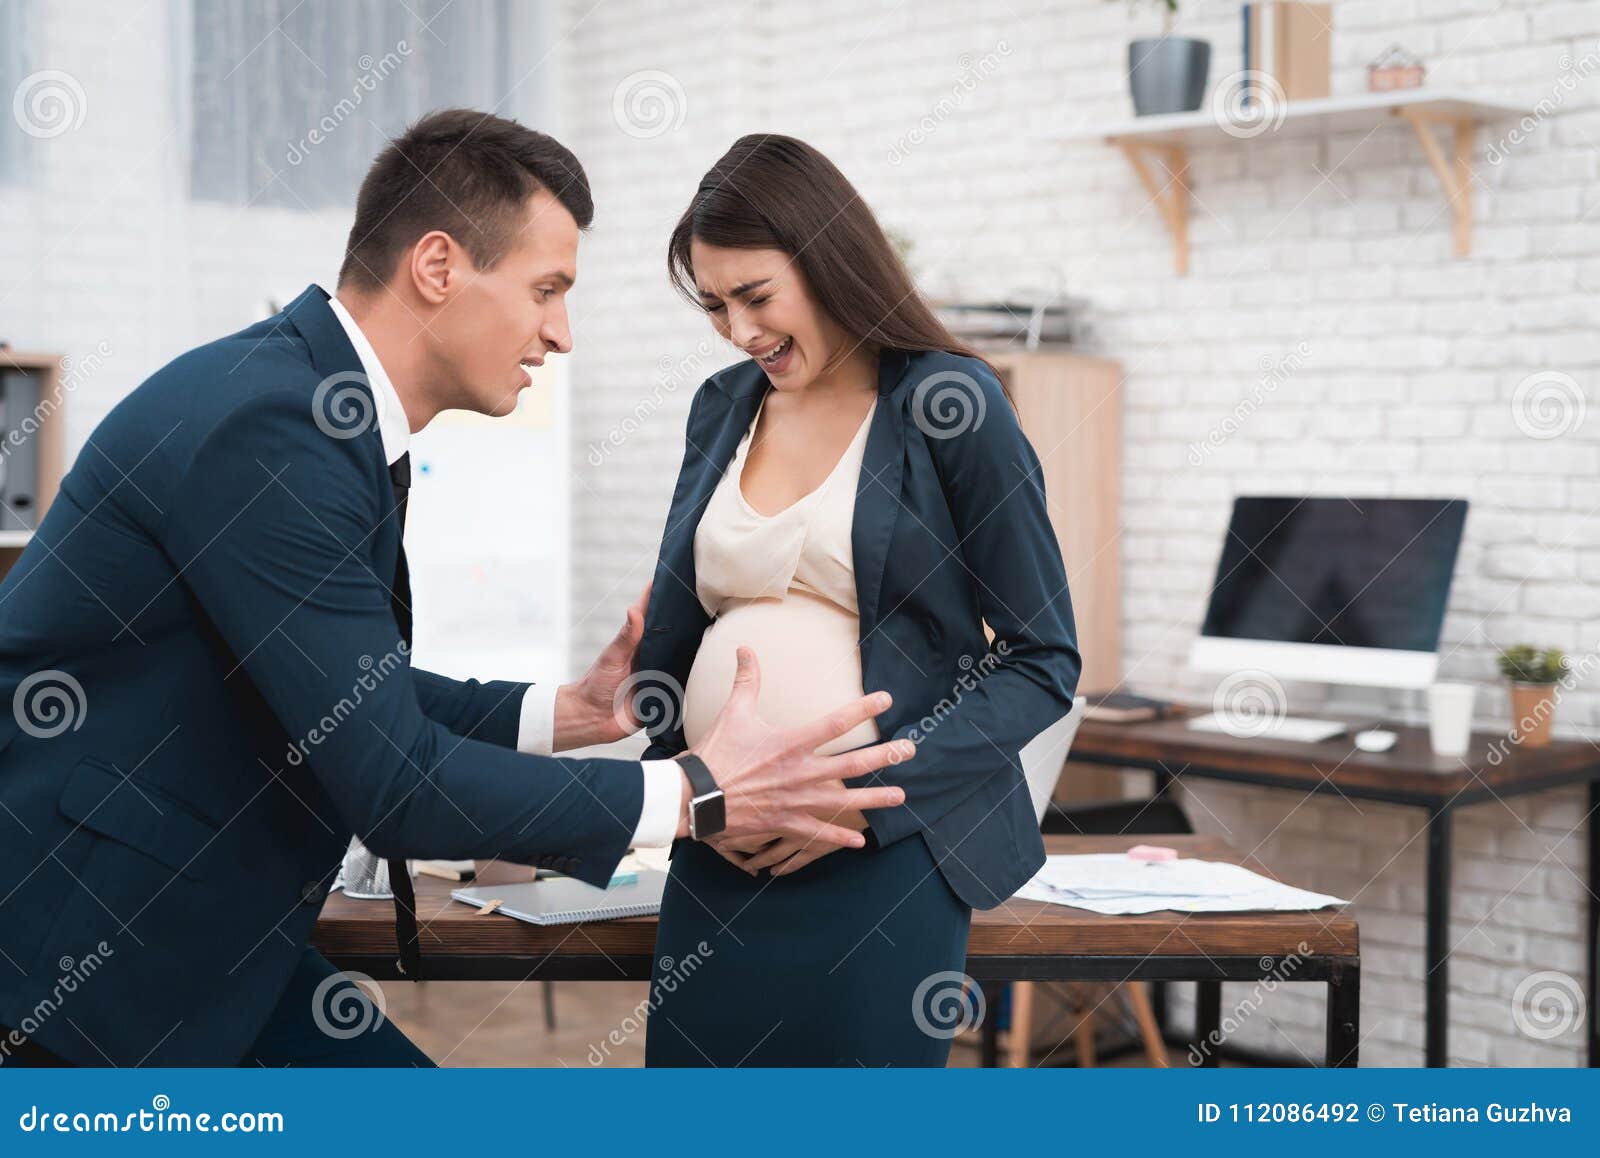 Pregnant Woman is Experiencing Labor in Office. Young Girl is ...